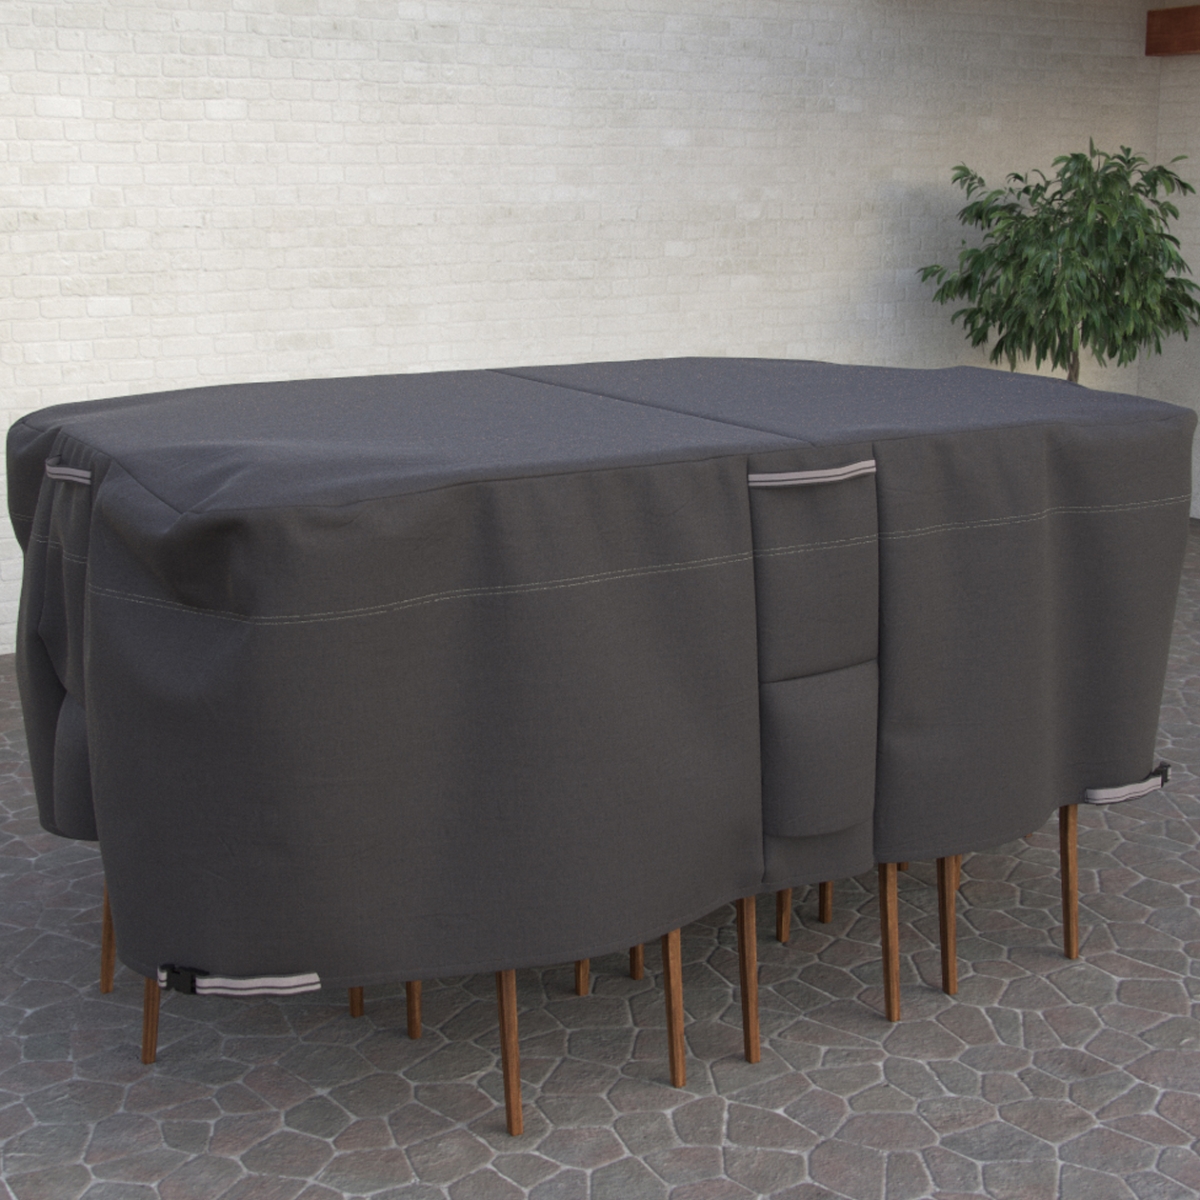 Lrfp5519 Taupe Oval Or Rectangle Durable & Water Resistant Fabric Premium Outdoor Patio Table & Chair Cover, Large